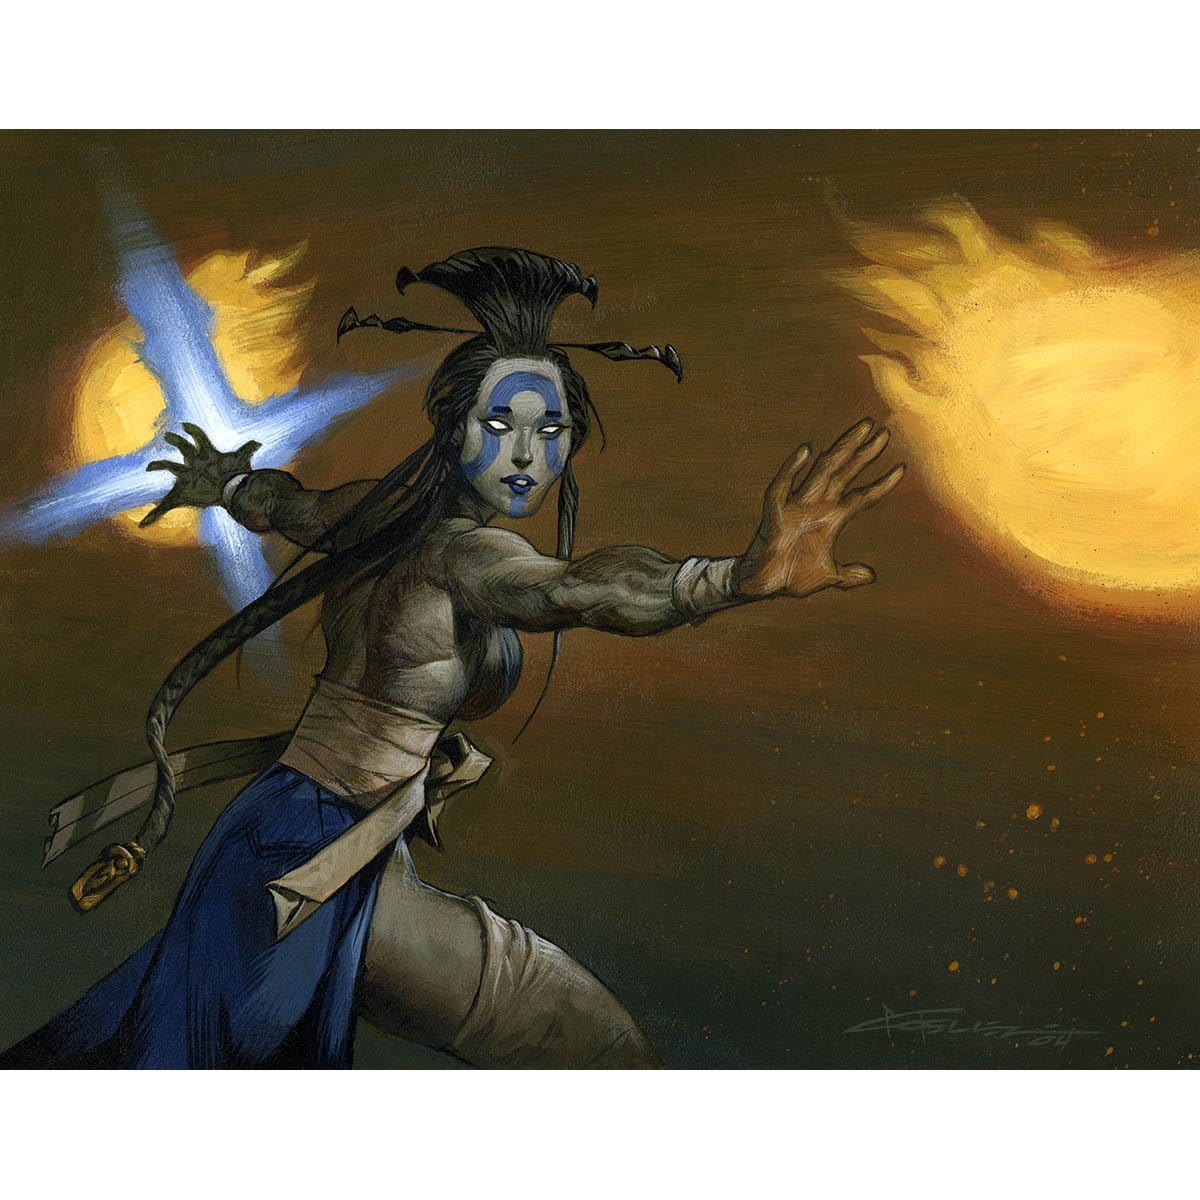 Twincast Print - Print - Original Magic Art - Accessories for Magic the Gathering and other card games